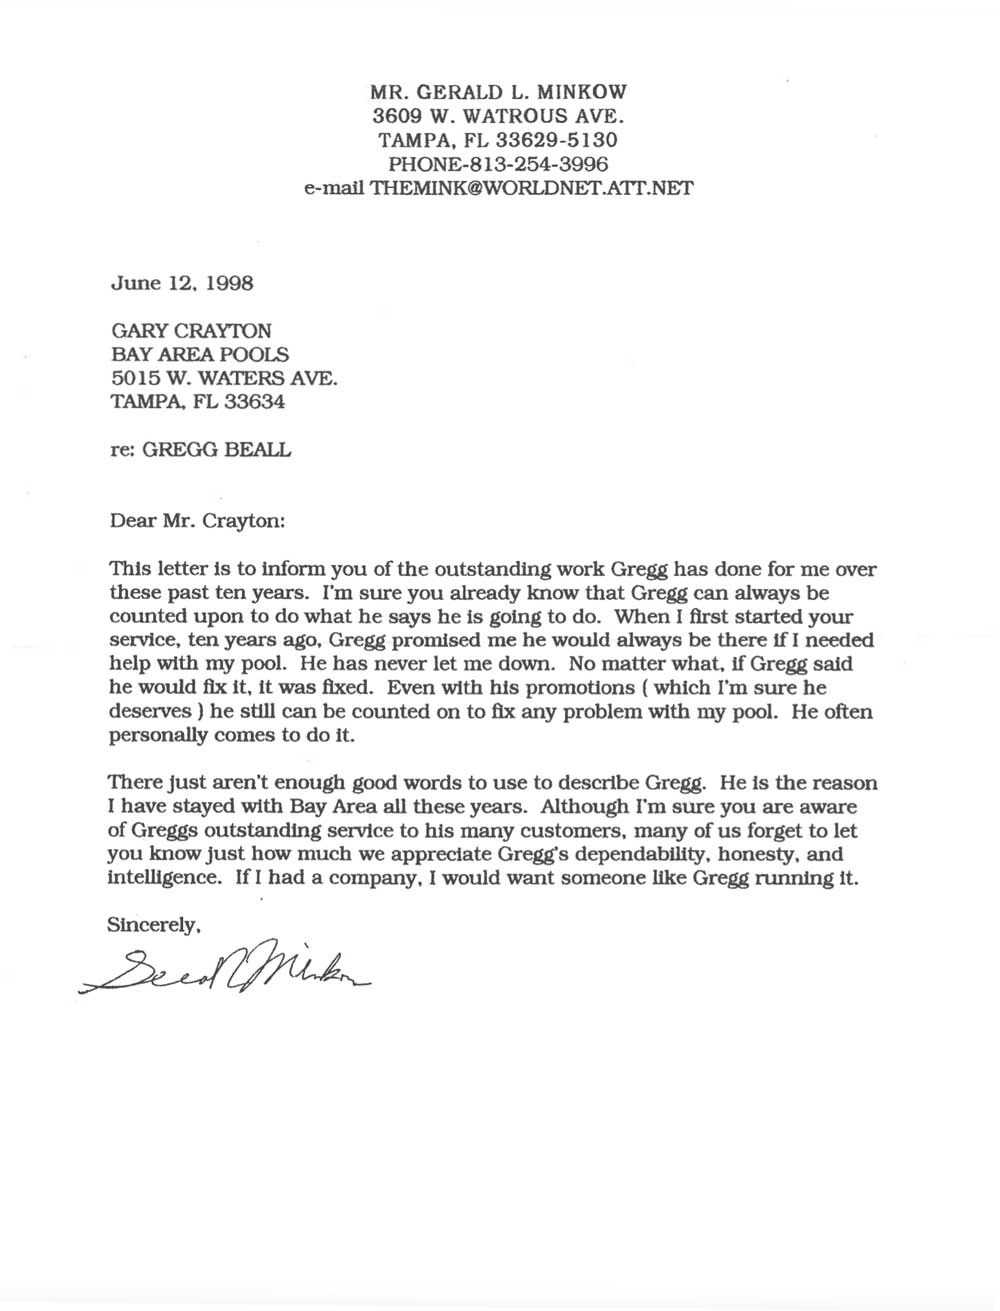 Gerald Minkow Letter of Recommendation | Greg Beall Home Watch & Pool Consulting